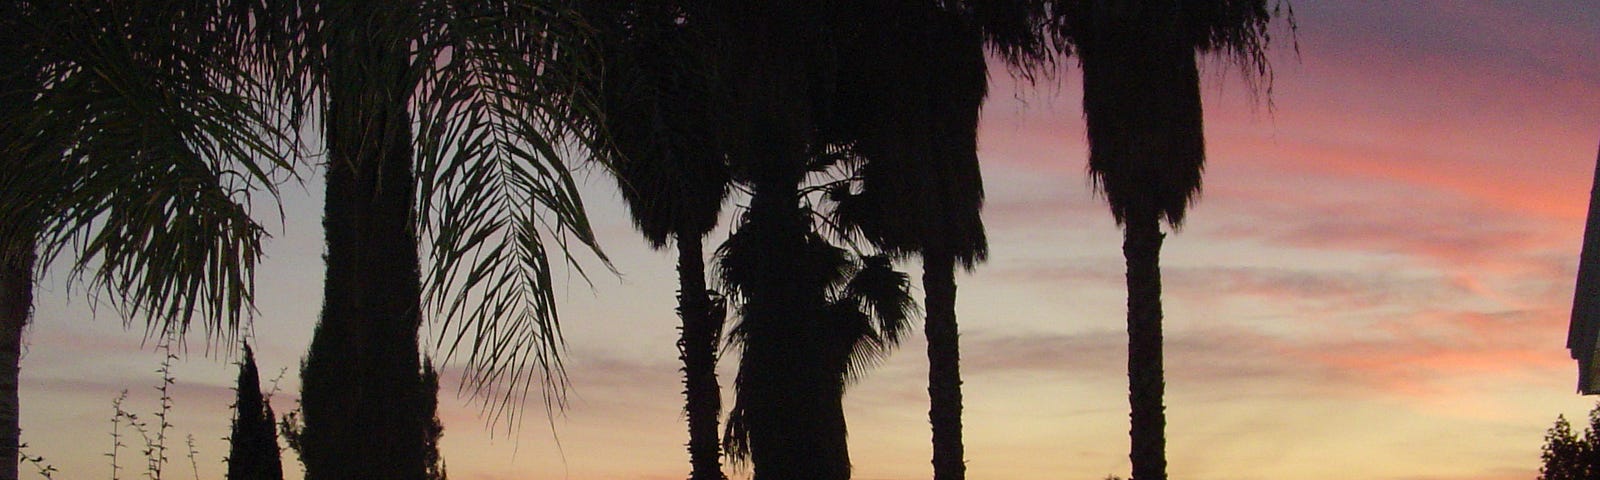 Palm trees in shadow with sunset behind